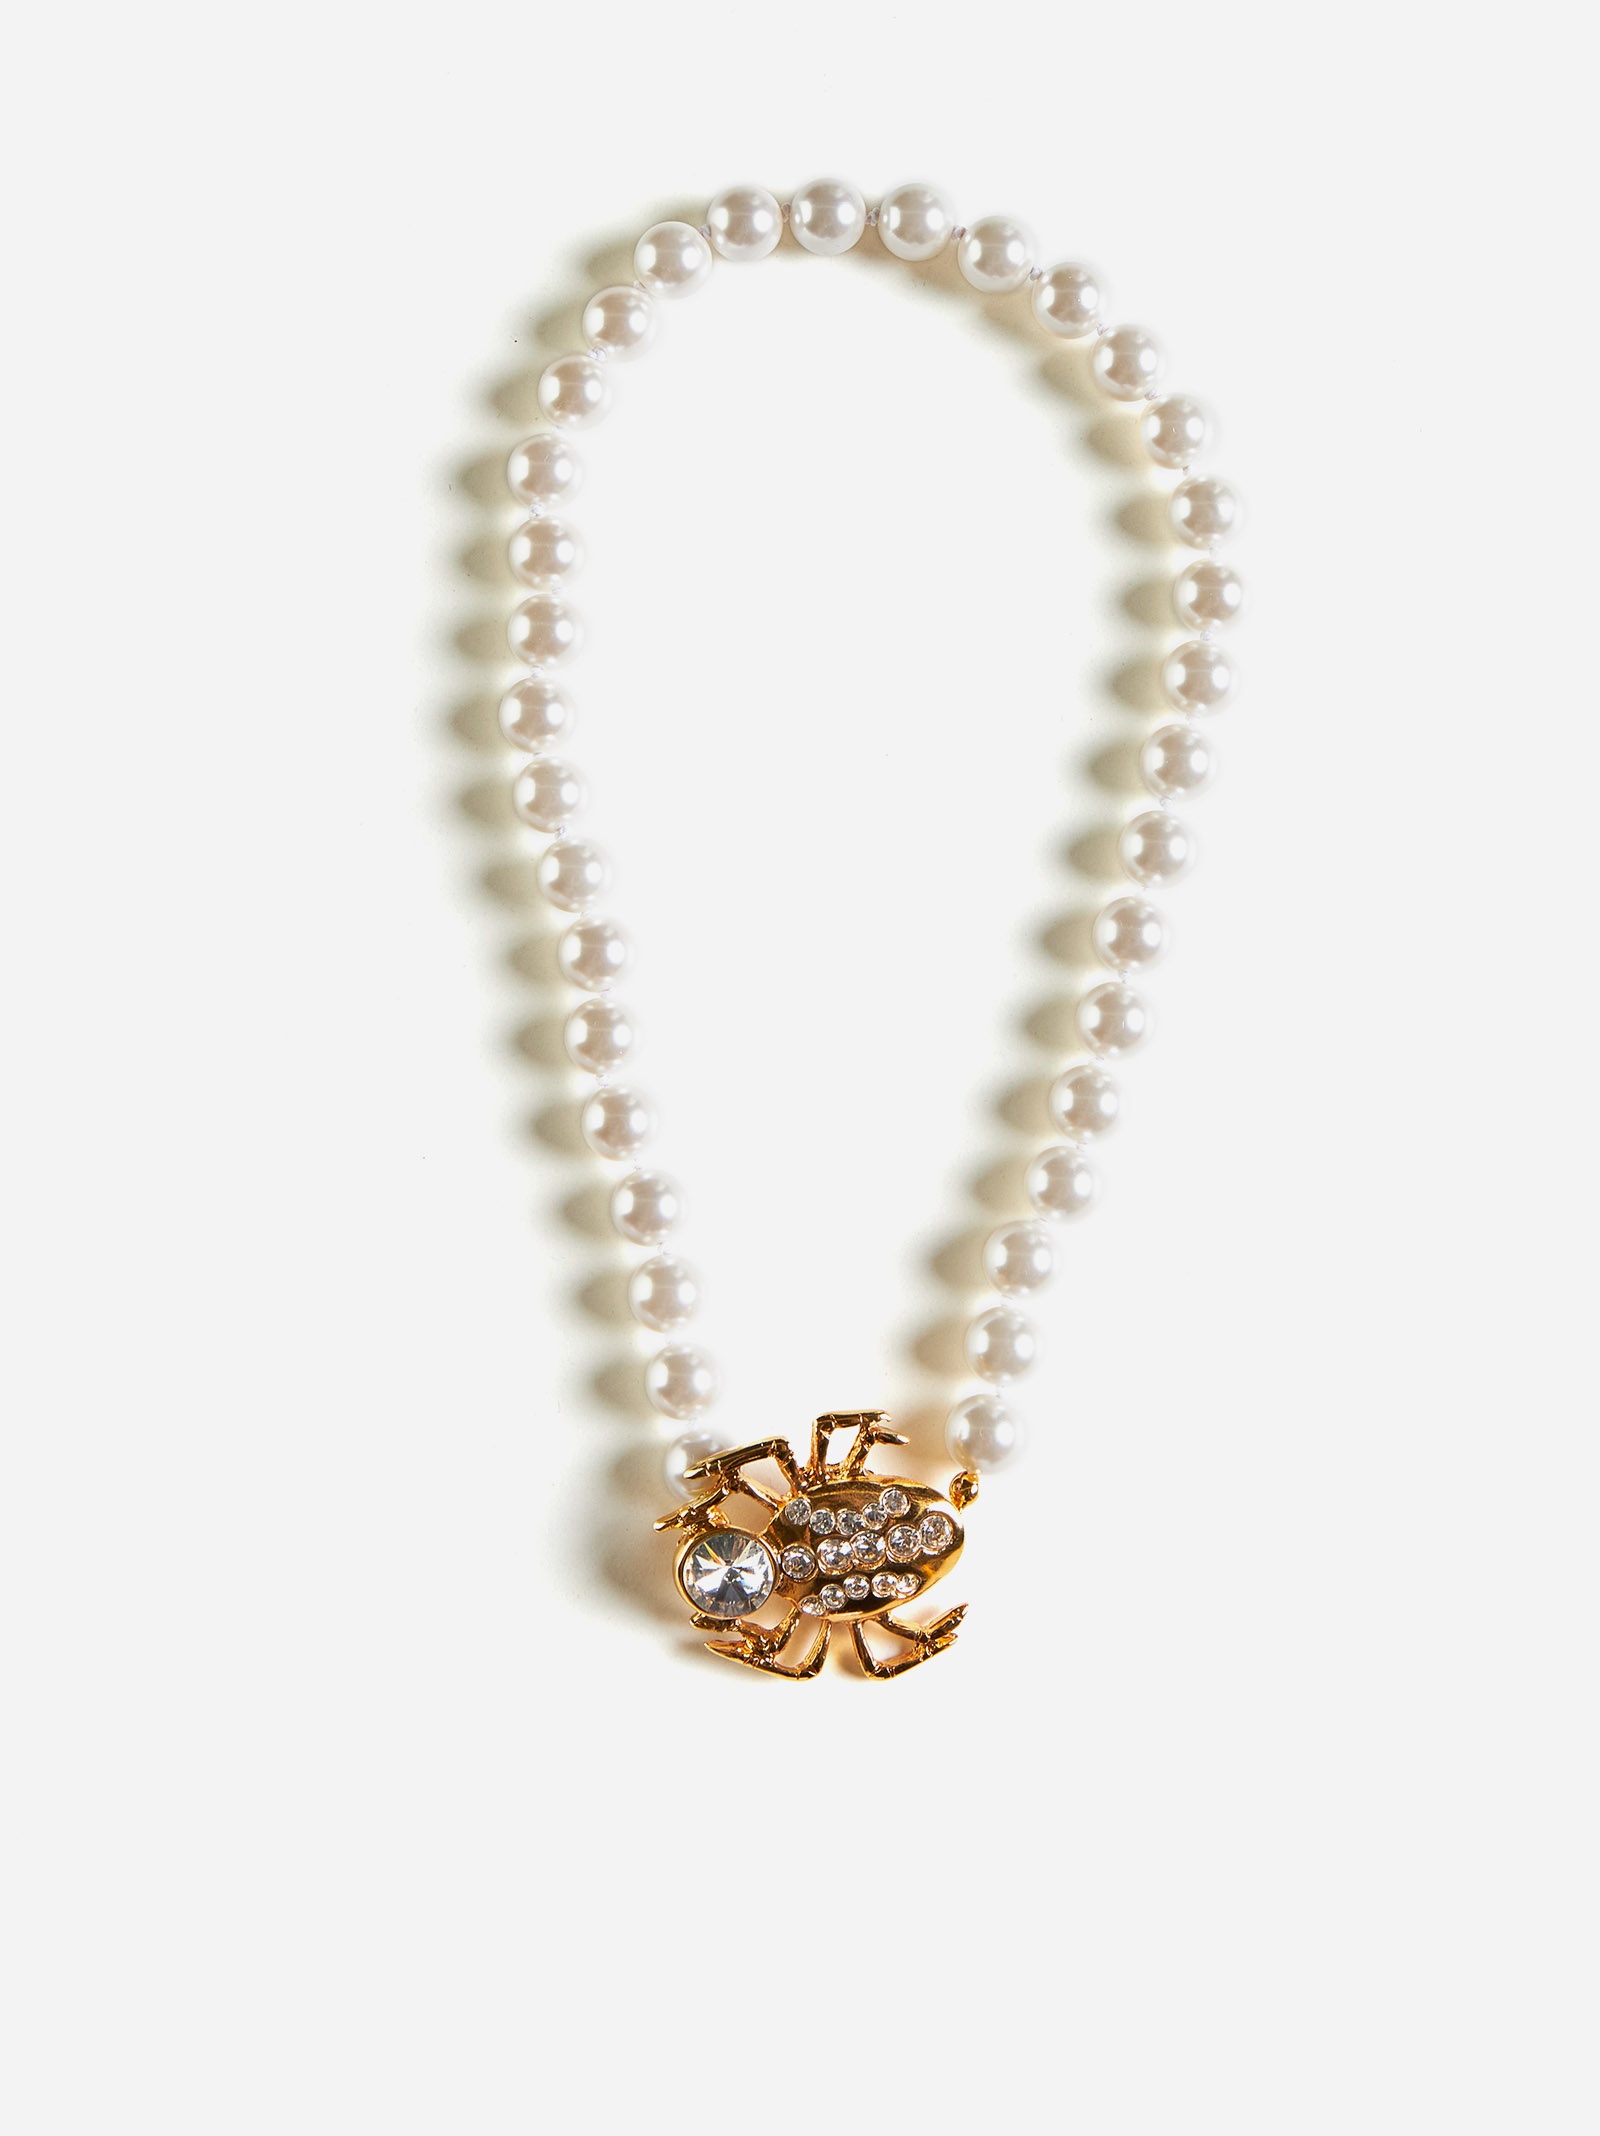 Spider pearl necklace - 1